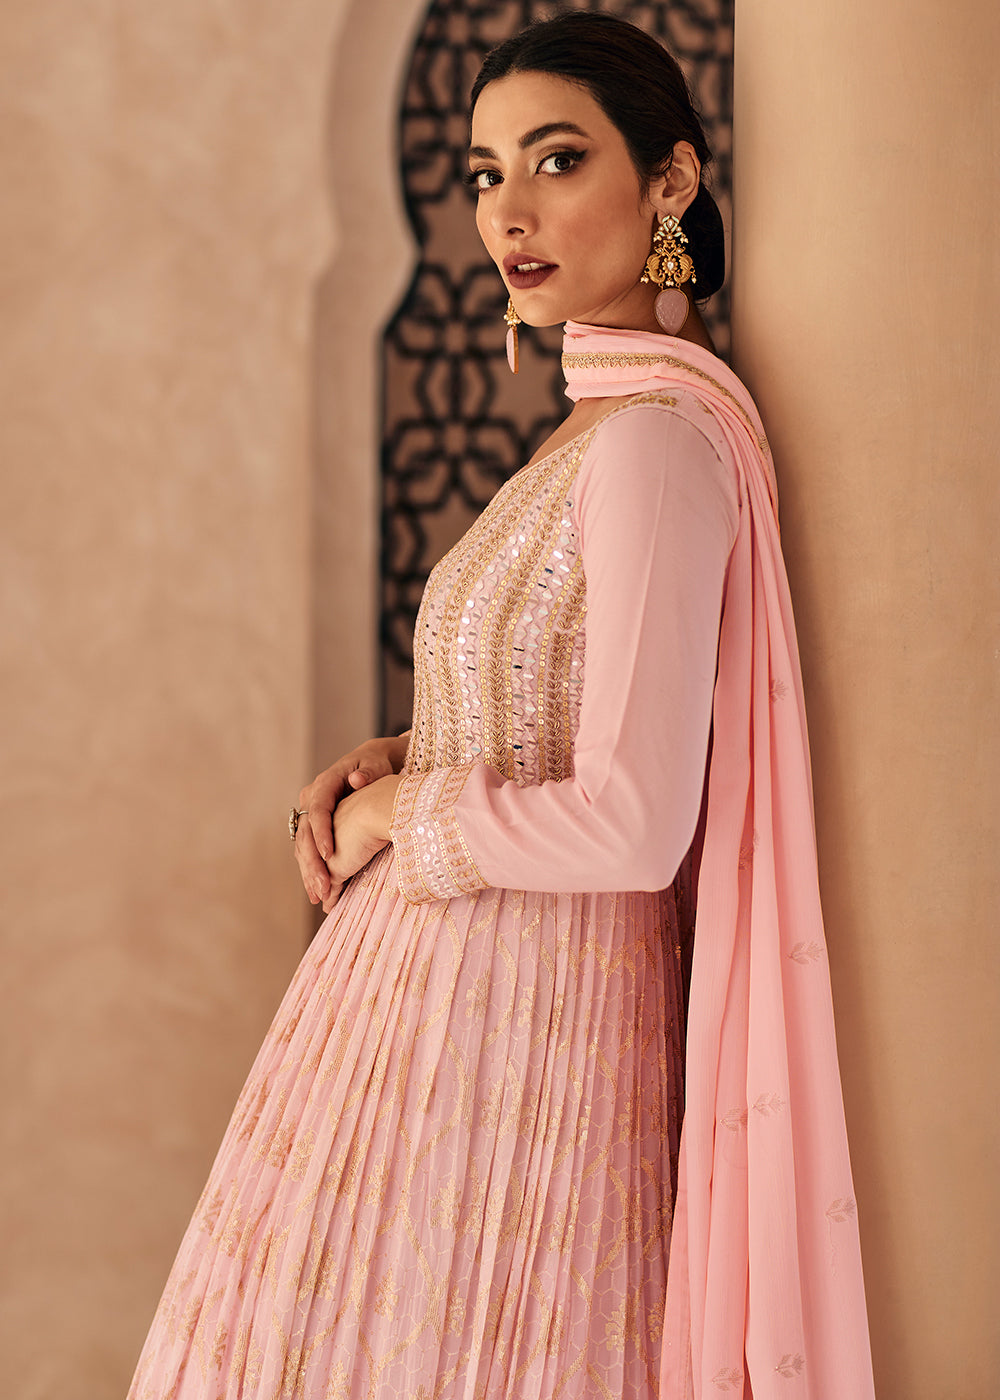 Buy Now Lovely Light Pink Georgette Traditional Wedding Anarkali Suit Online in USA, UK, Australia, New Zealand, Canada & Worldwide at Empress Clothing.